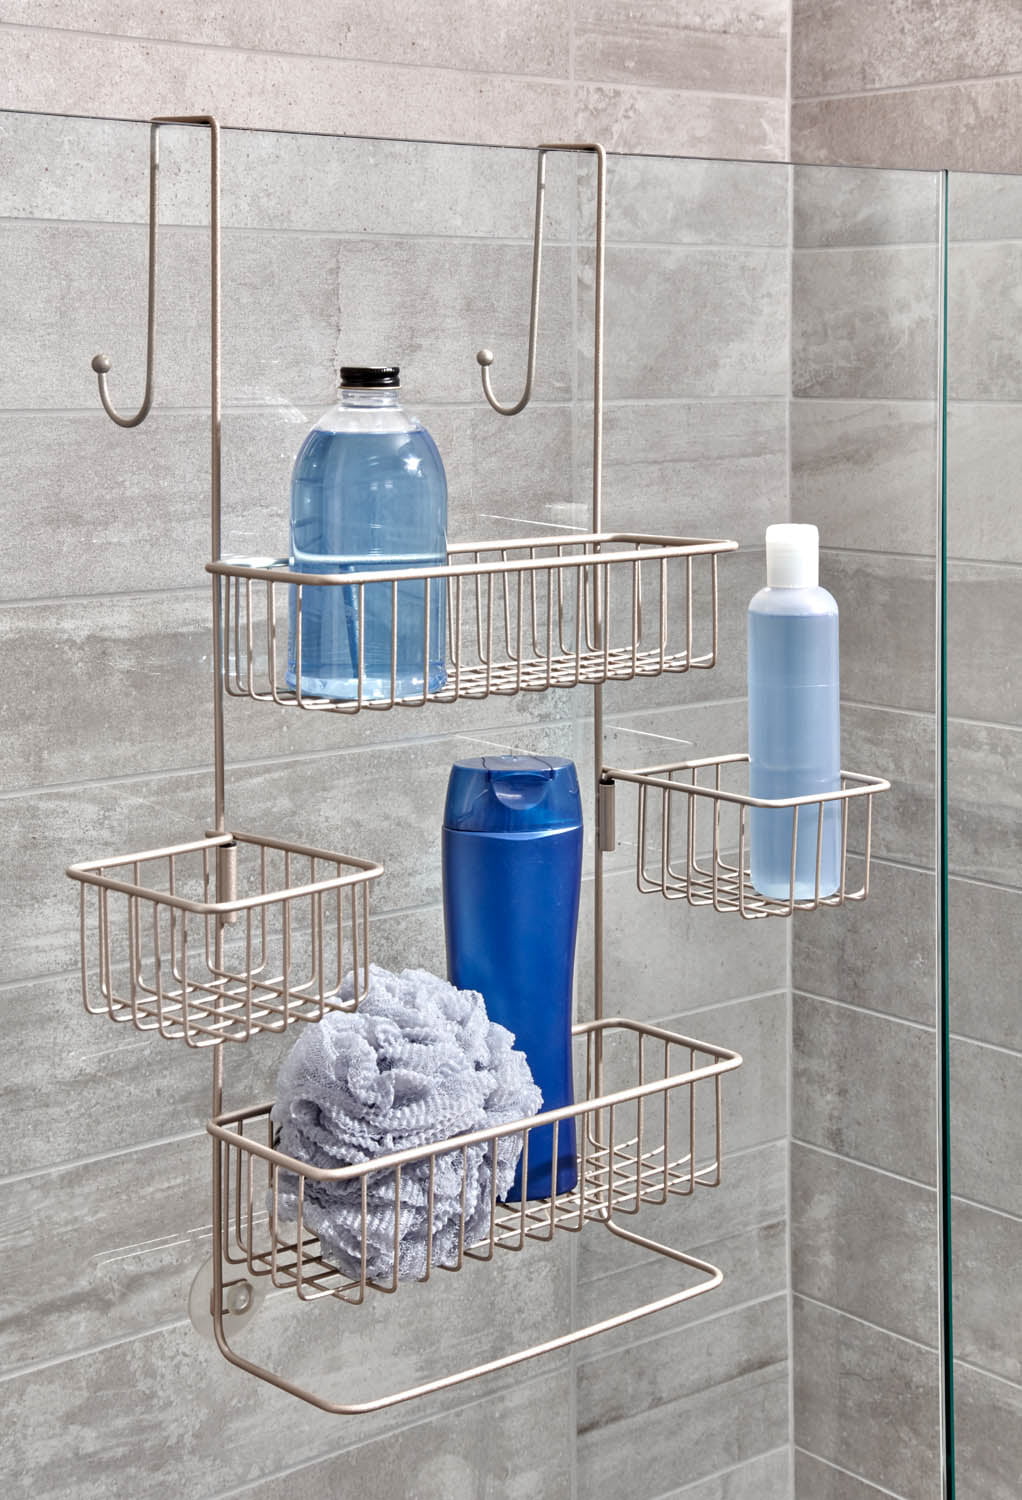 Bathroom Shower Caddy Drill Free Sturdy Rust Proof Stainless Steel Hanging Shower Organizer Shelf Basket Storage Rack Dyna-Living Over The Shower Door Caddy Pantry Organizer Rack with Reliable Hooks 